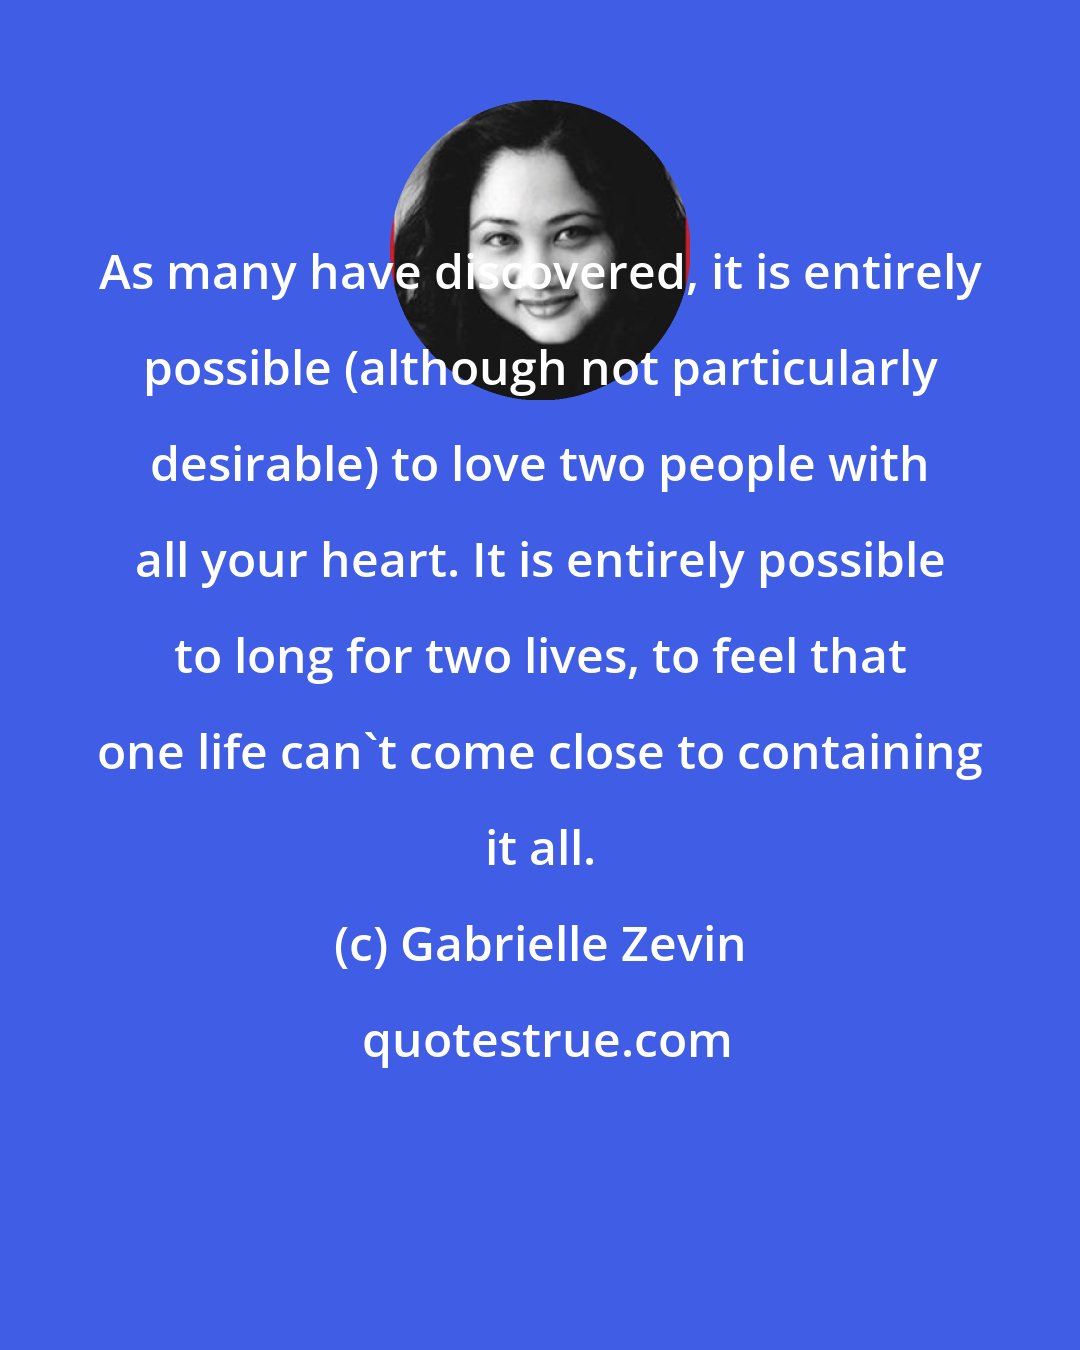 Gabrielle Zevin: As many have discovered, it is entirely possible (although not particularly desirable) to love two people with all your heart. It is entirely possible to long for two lives, to feel that one life can't come close to containing it all.